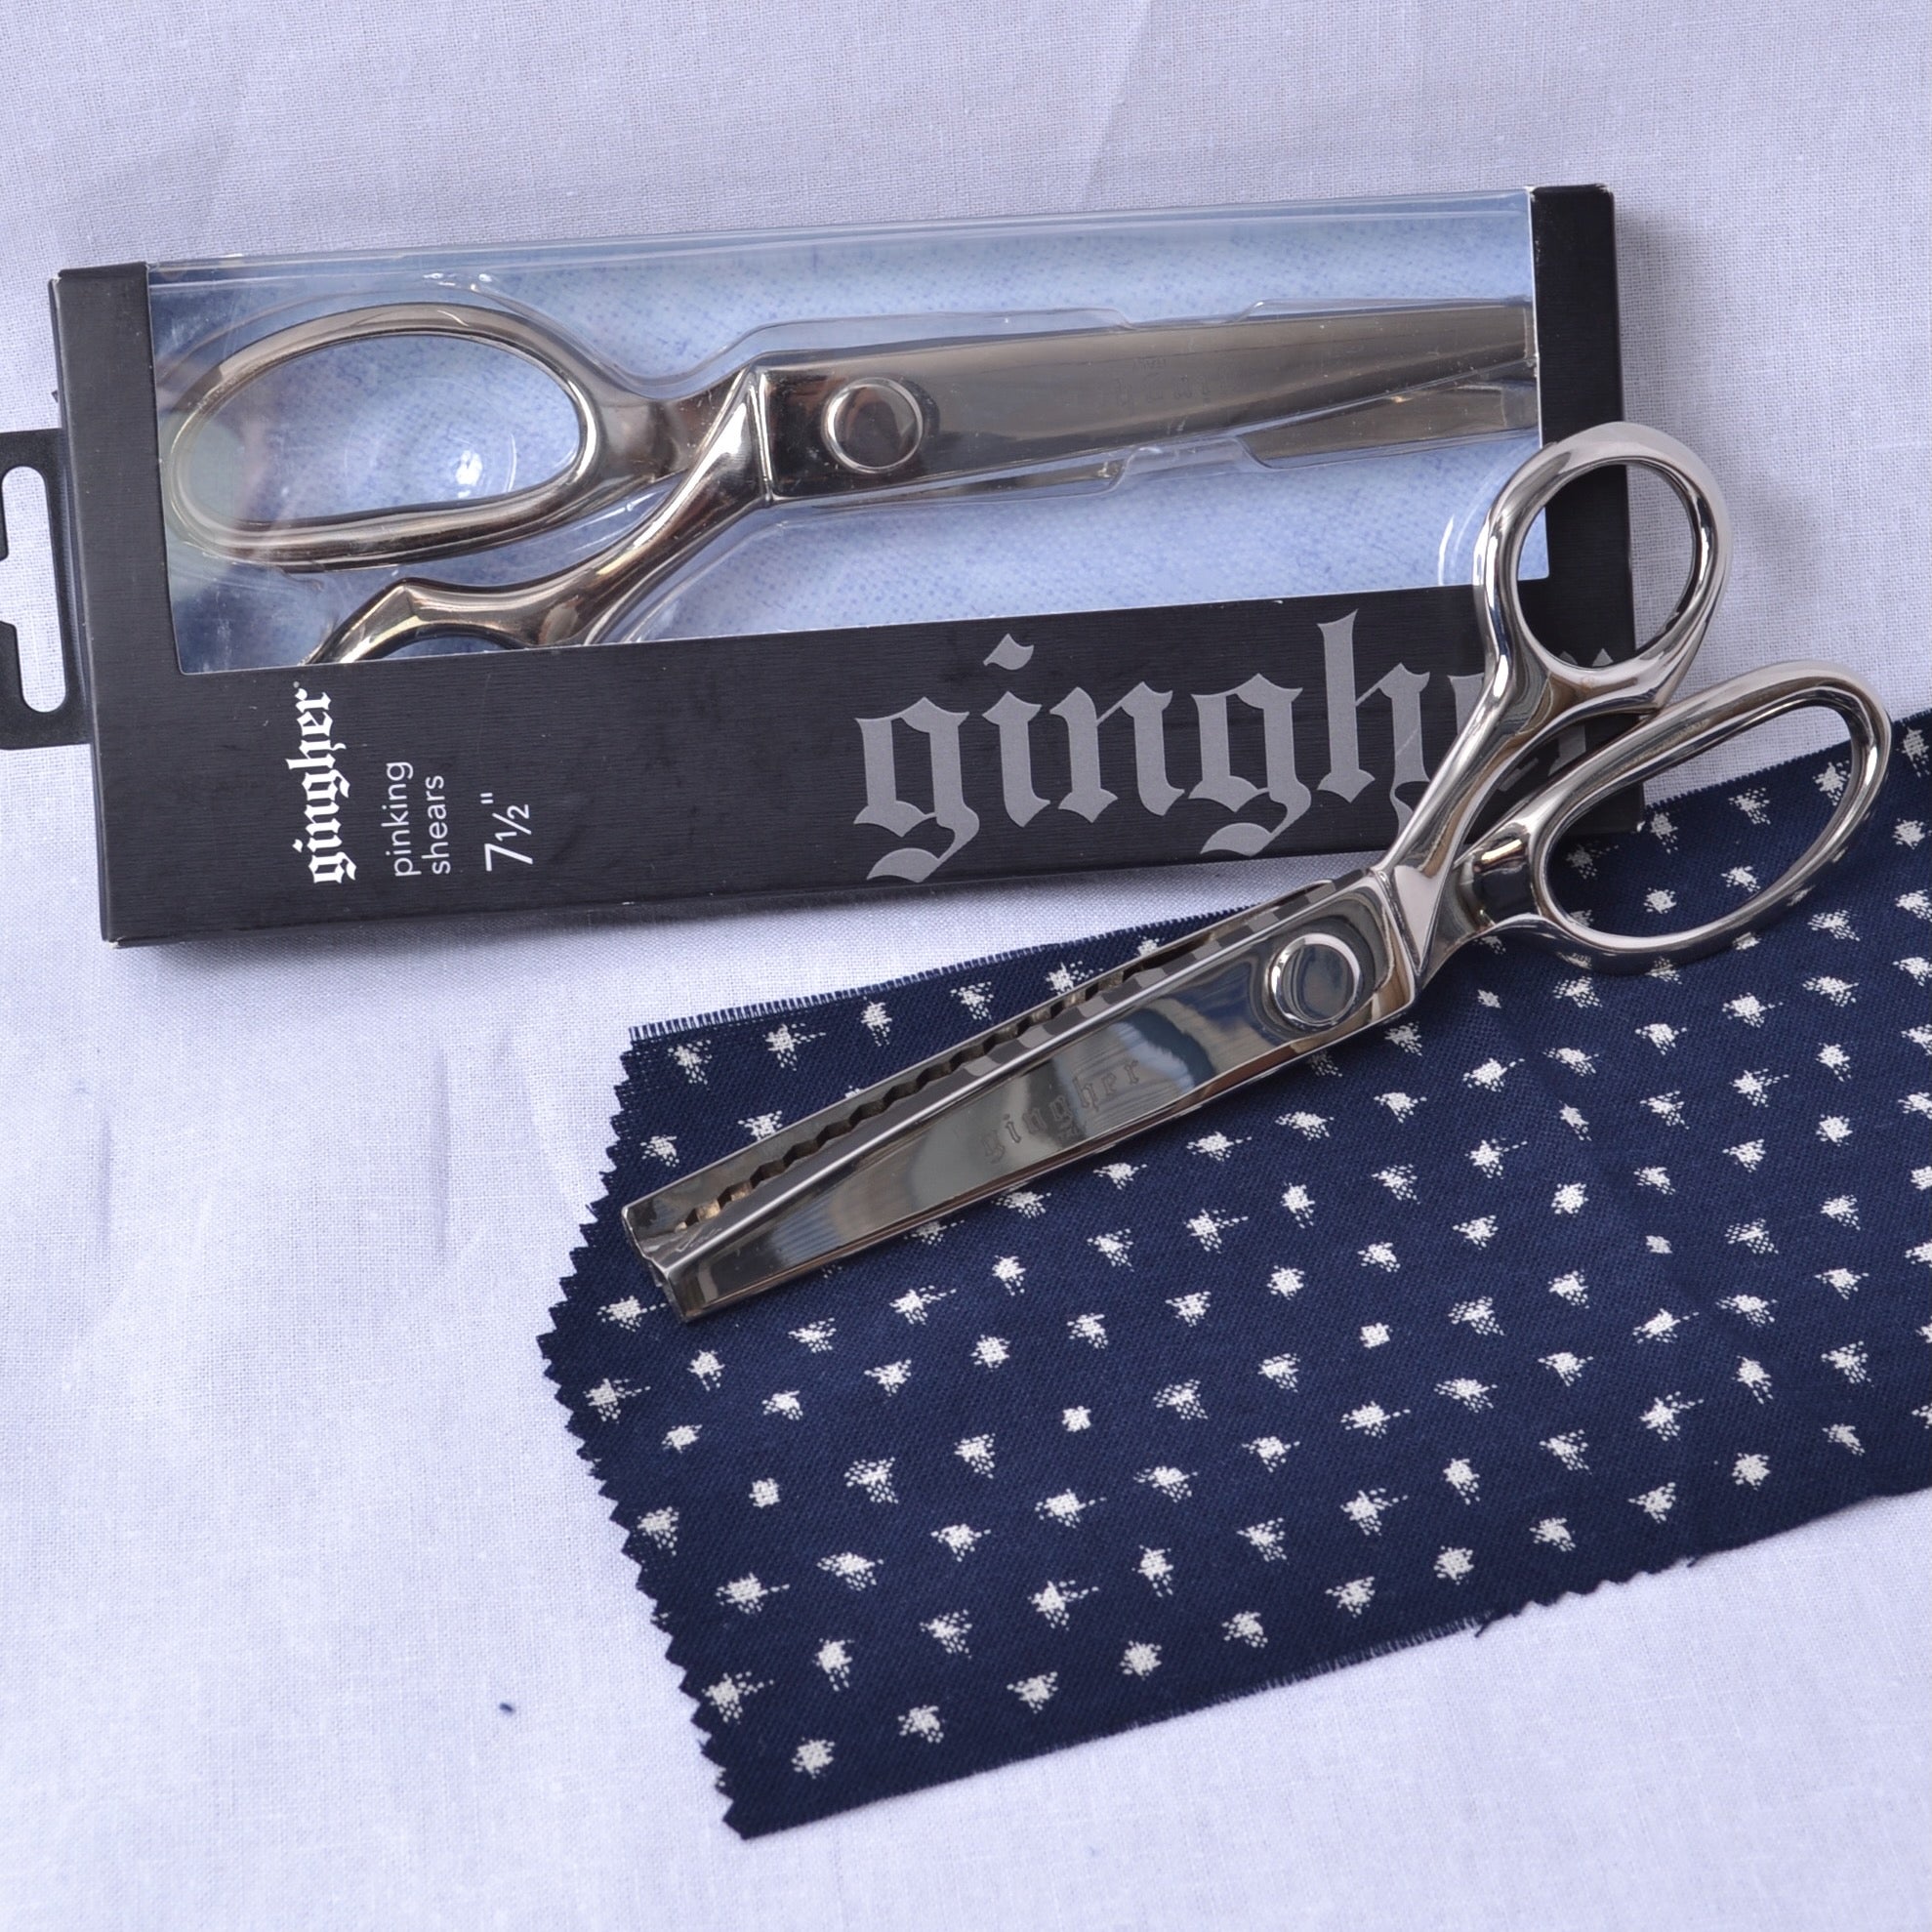 Gingher Sewing Scissors & Shears in Sewing & Cutting Tools 